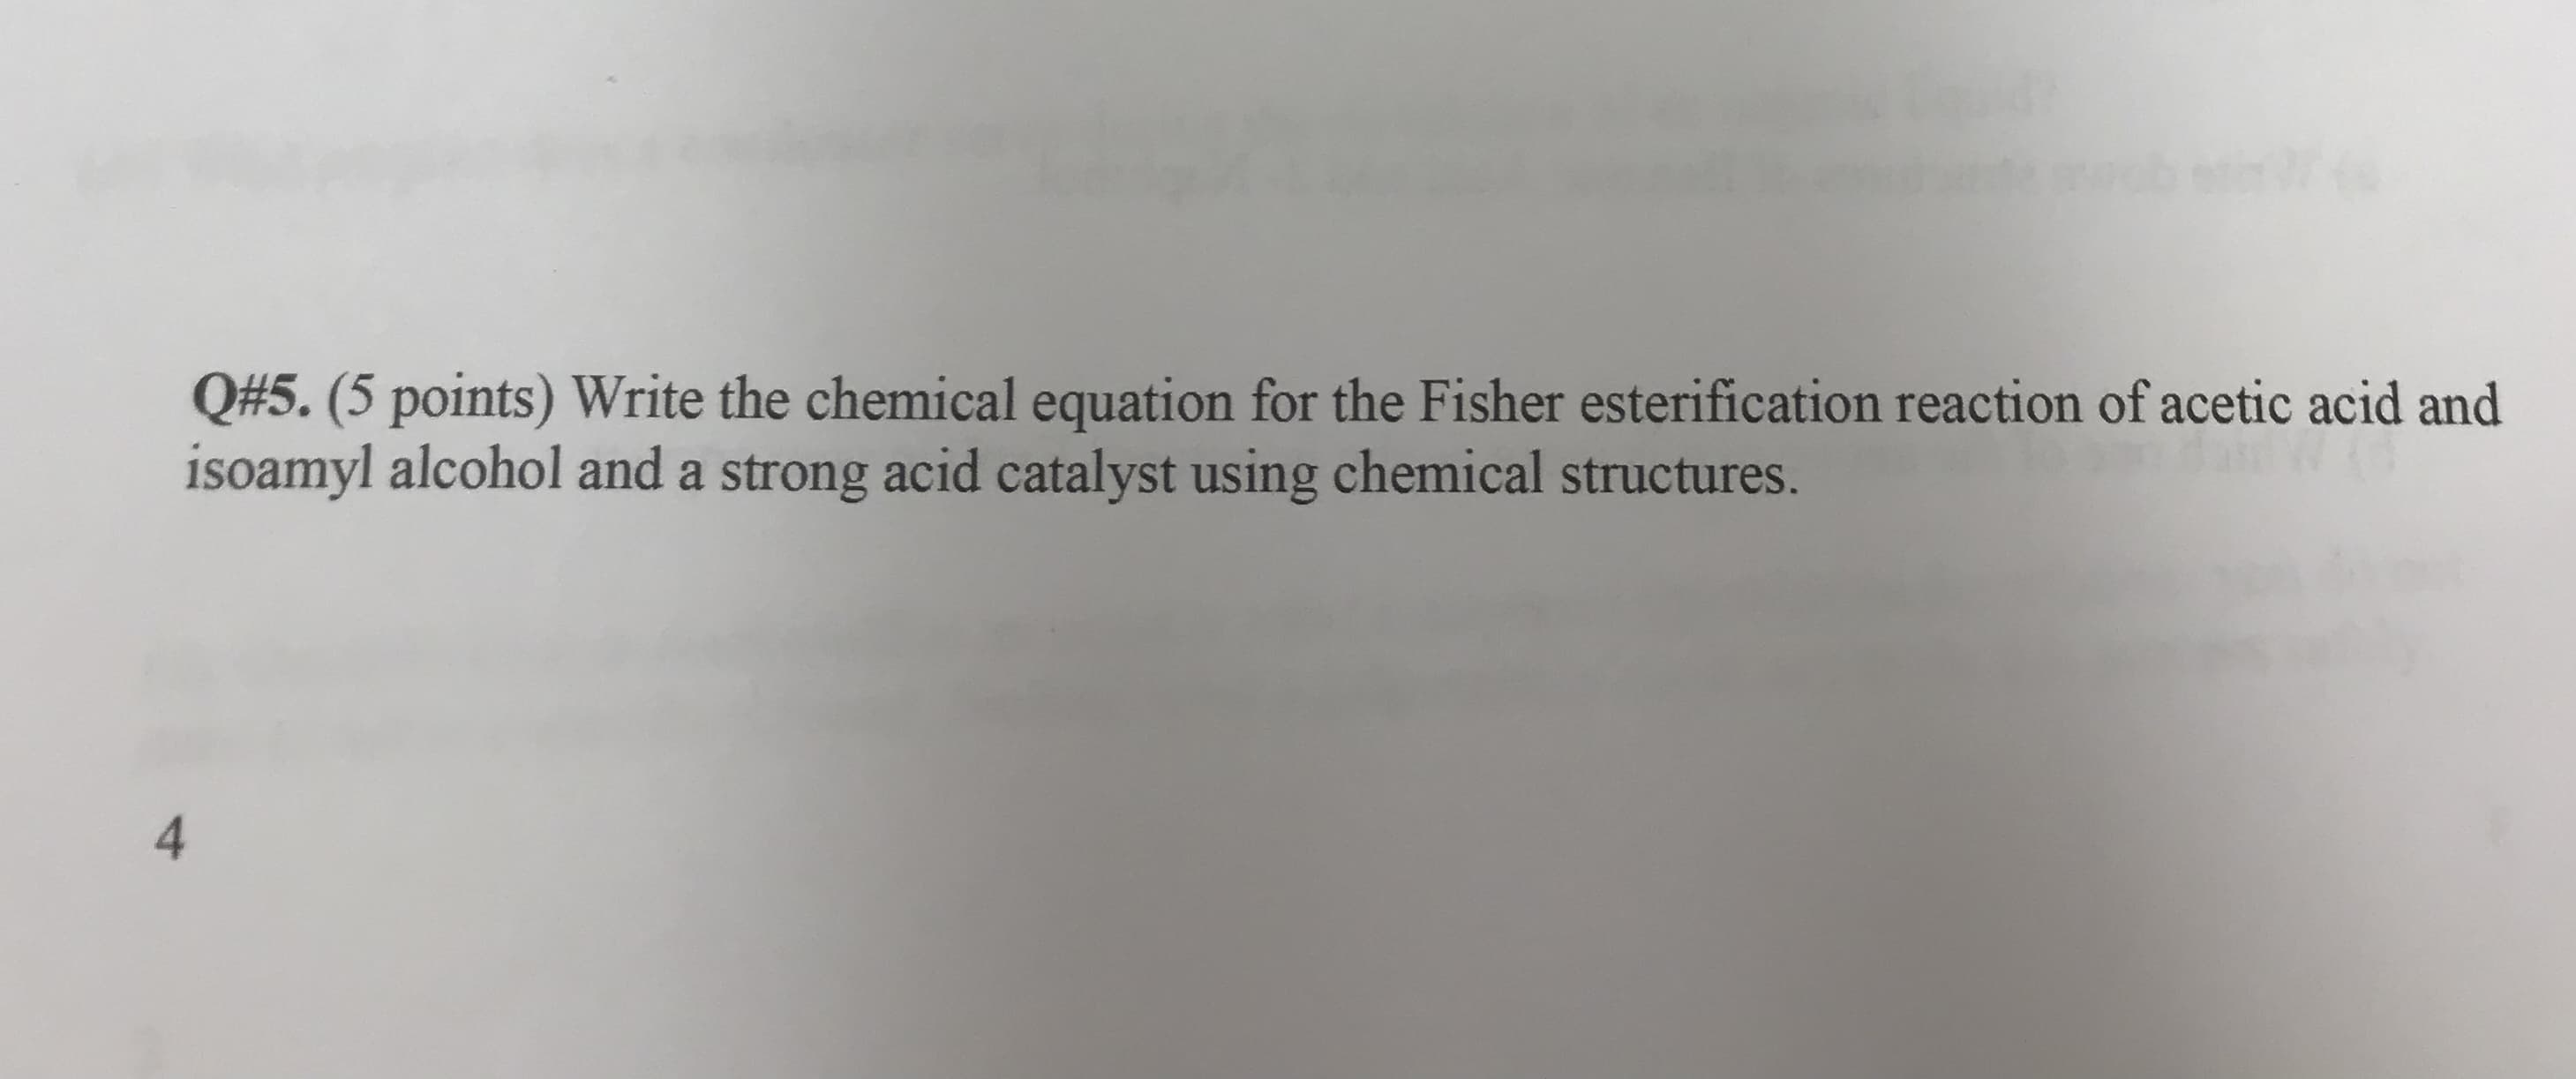 Q#5. (5 points) Write the chemical equation for the Fisher esterification reaction of acetic acid and
isoamyl alcohol and a strong acid catalyst using chemical structures.
4
